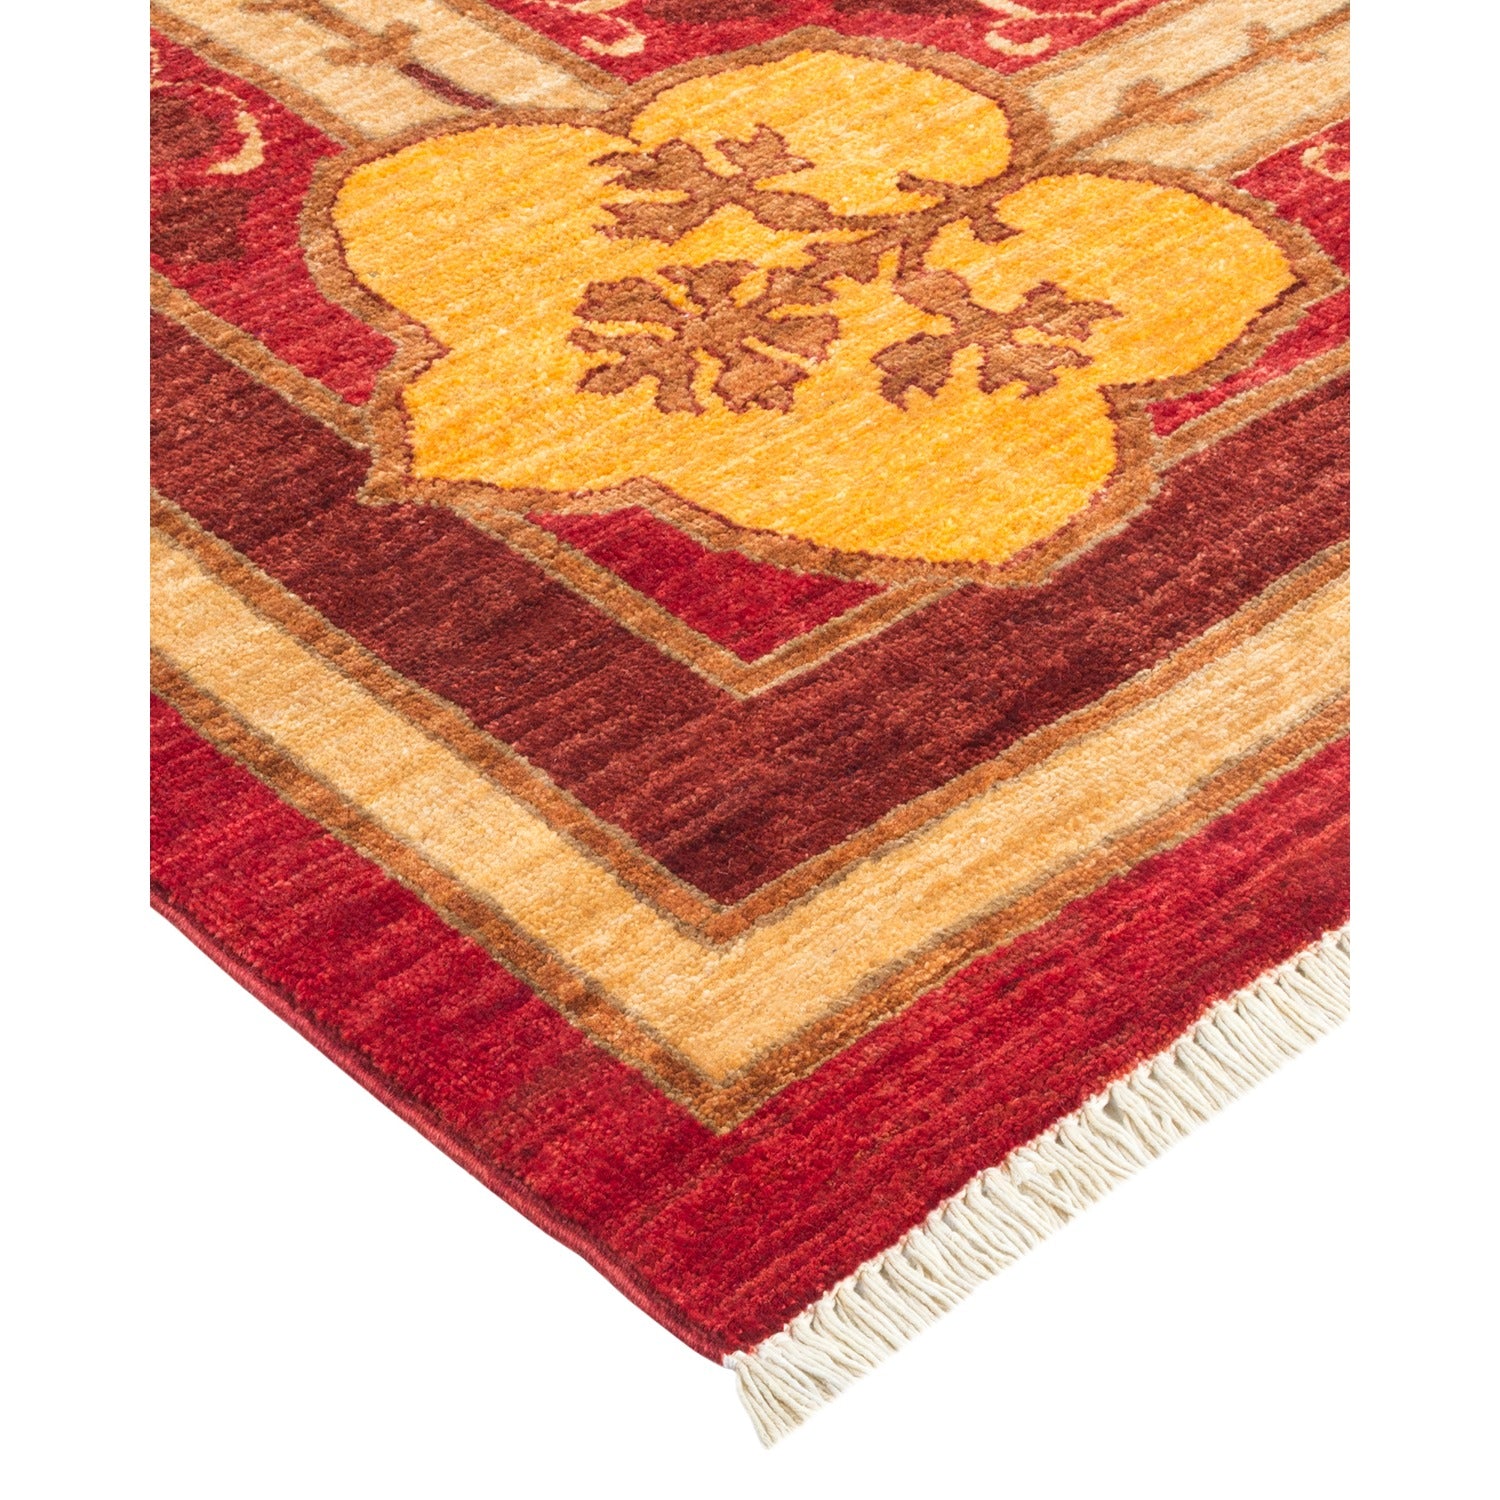 Vibrant and intricate hand-woven rug with a geometric floral motif.